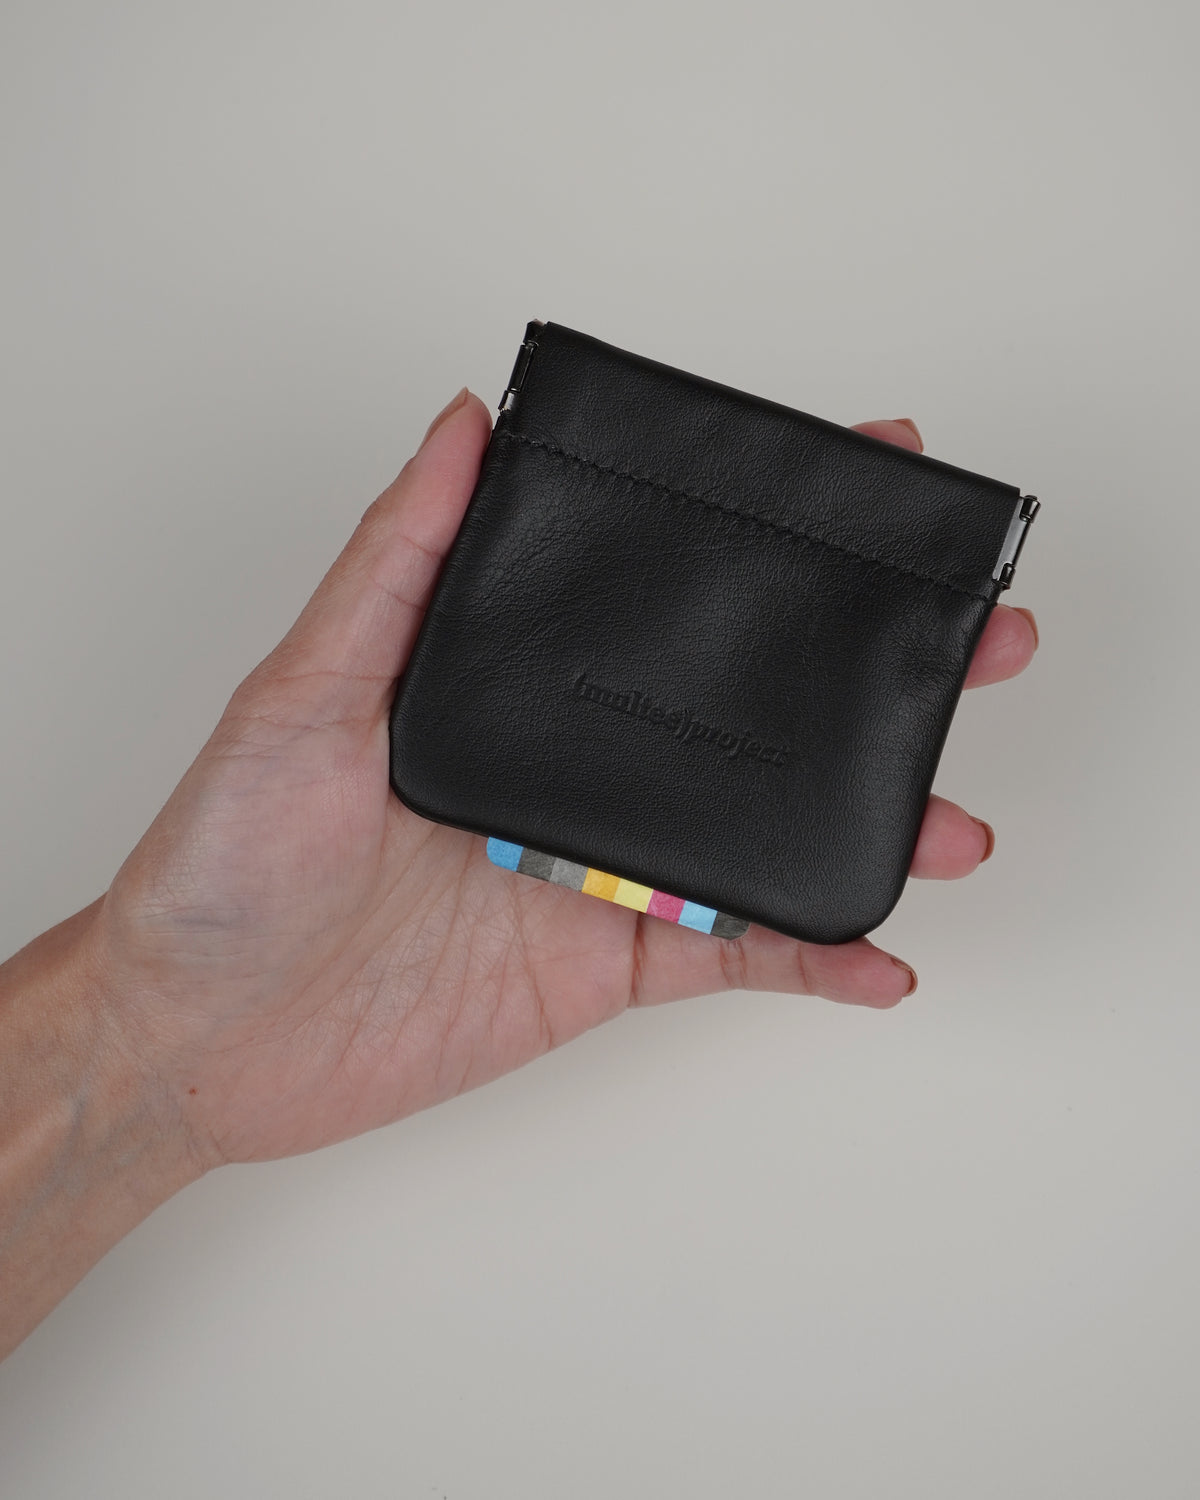 Leather Utility Pouch